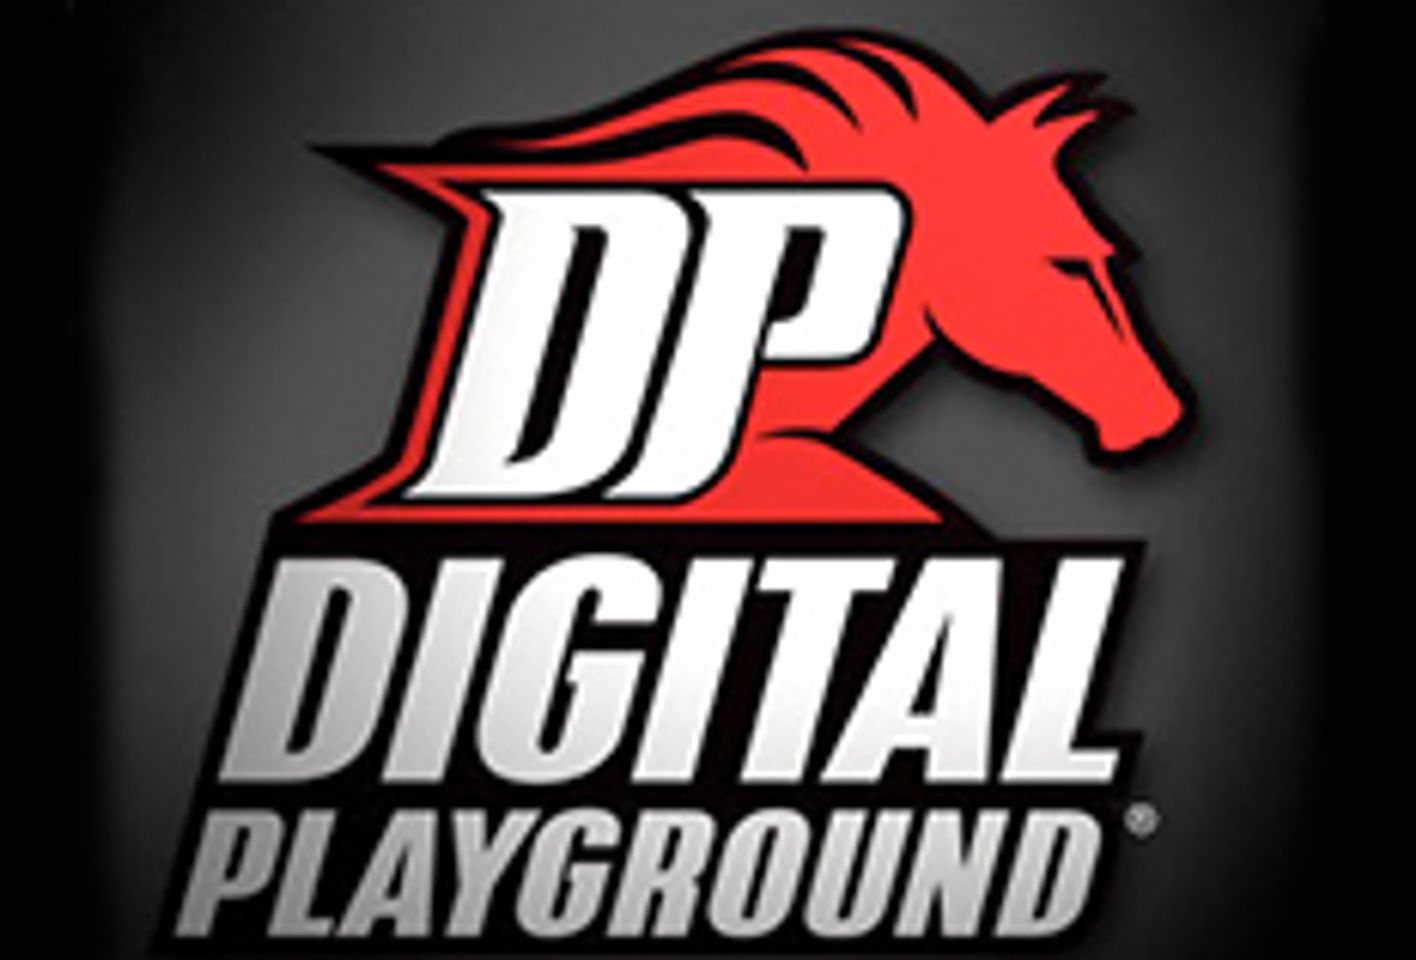 Digital Playground’s Executives Exhibiting at 2010 International Lingerie Show